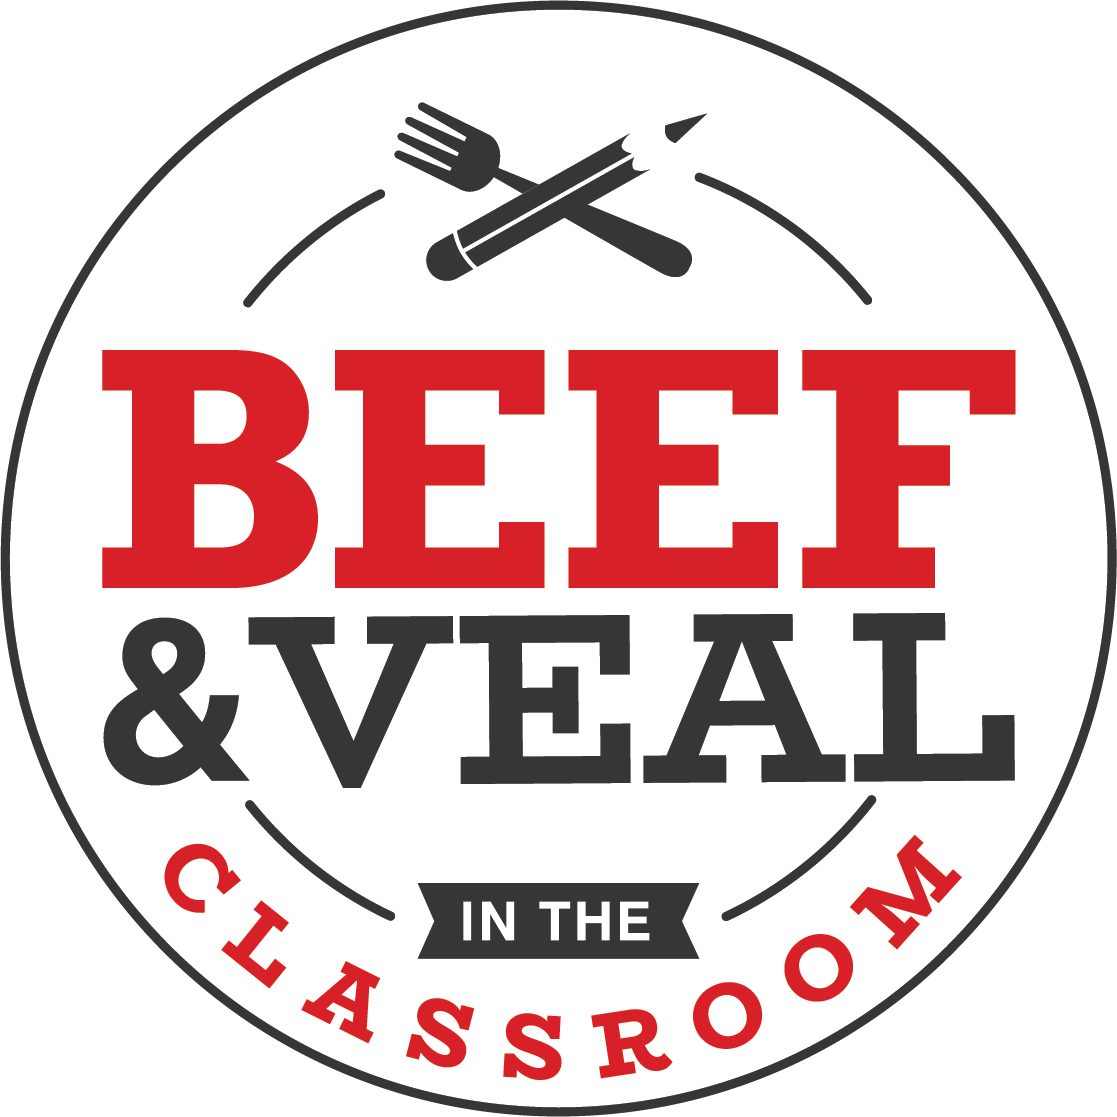 PENNSYLVANIA BEEF COUNCIL SUPPORTING HANDS-ON CULINARY EDUCATION WITH BEEF & VEAL